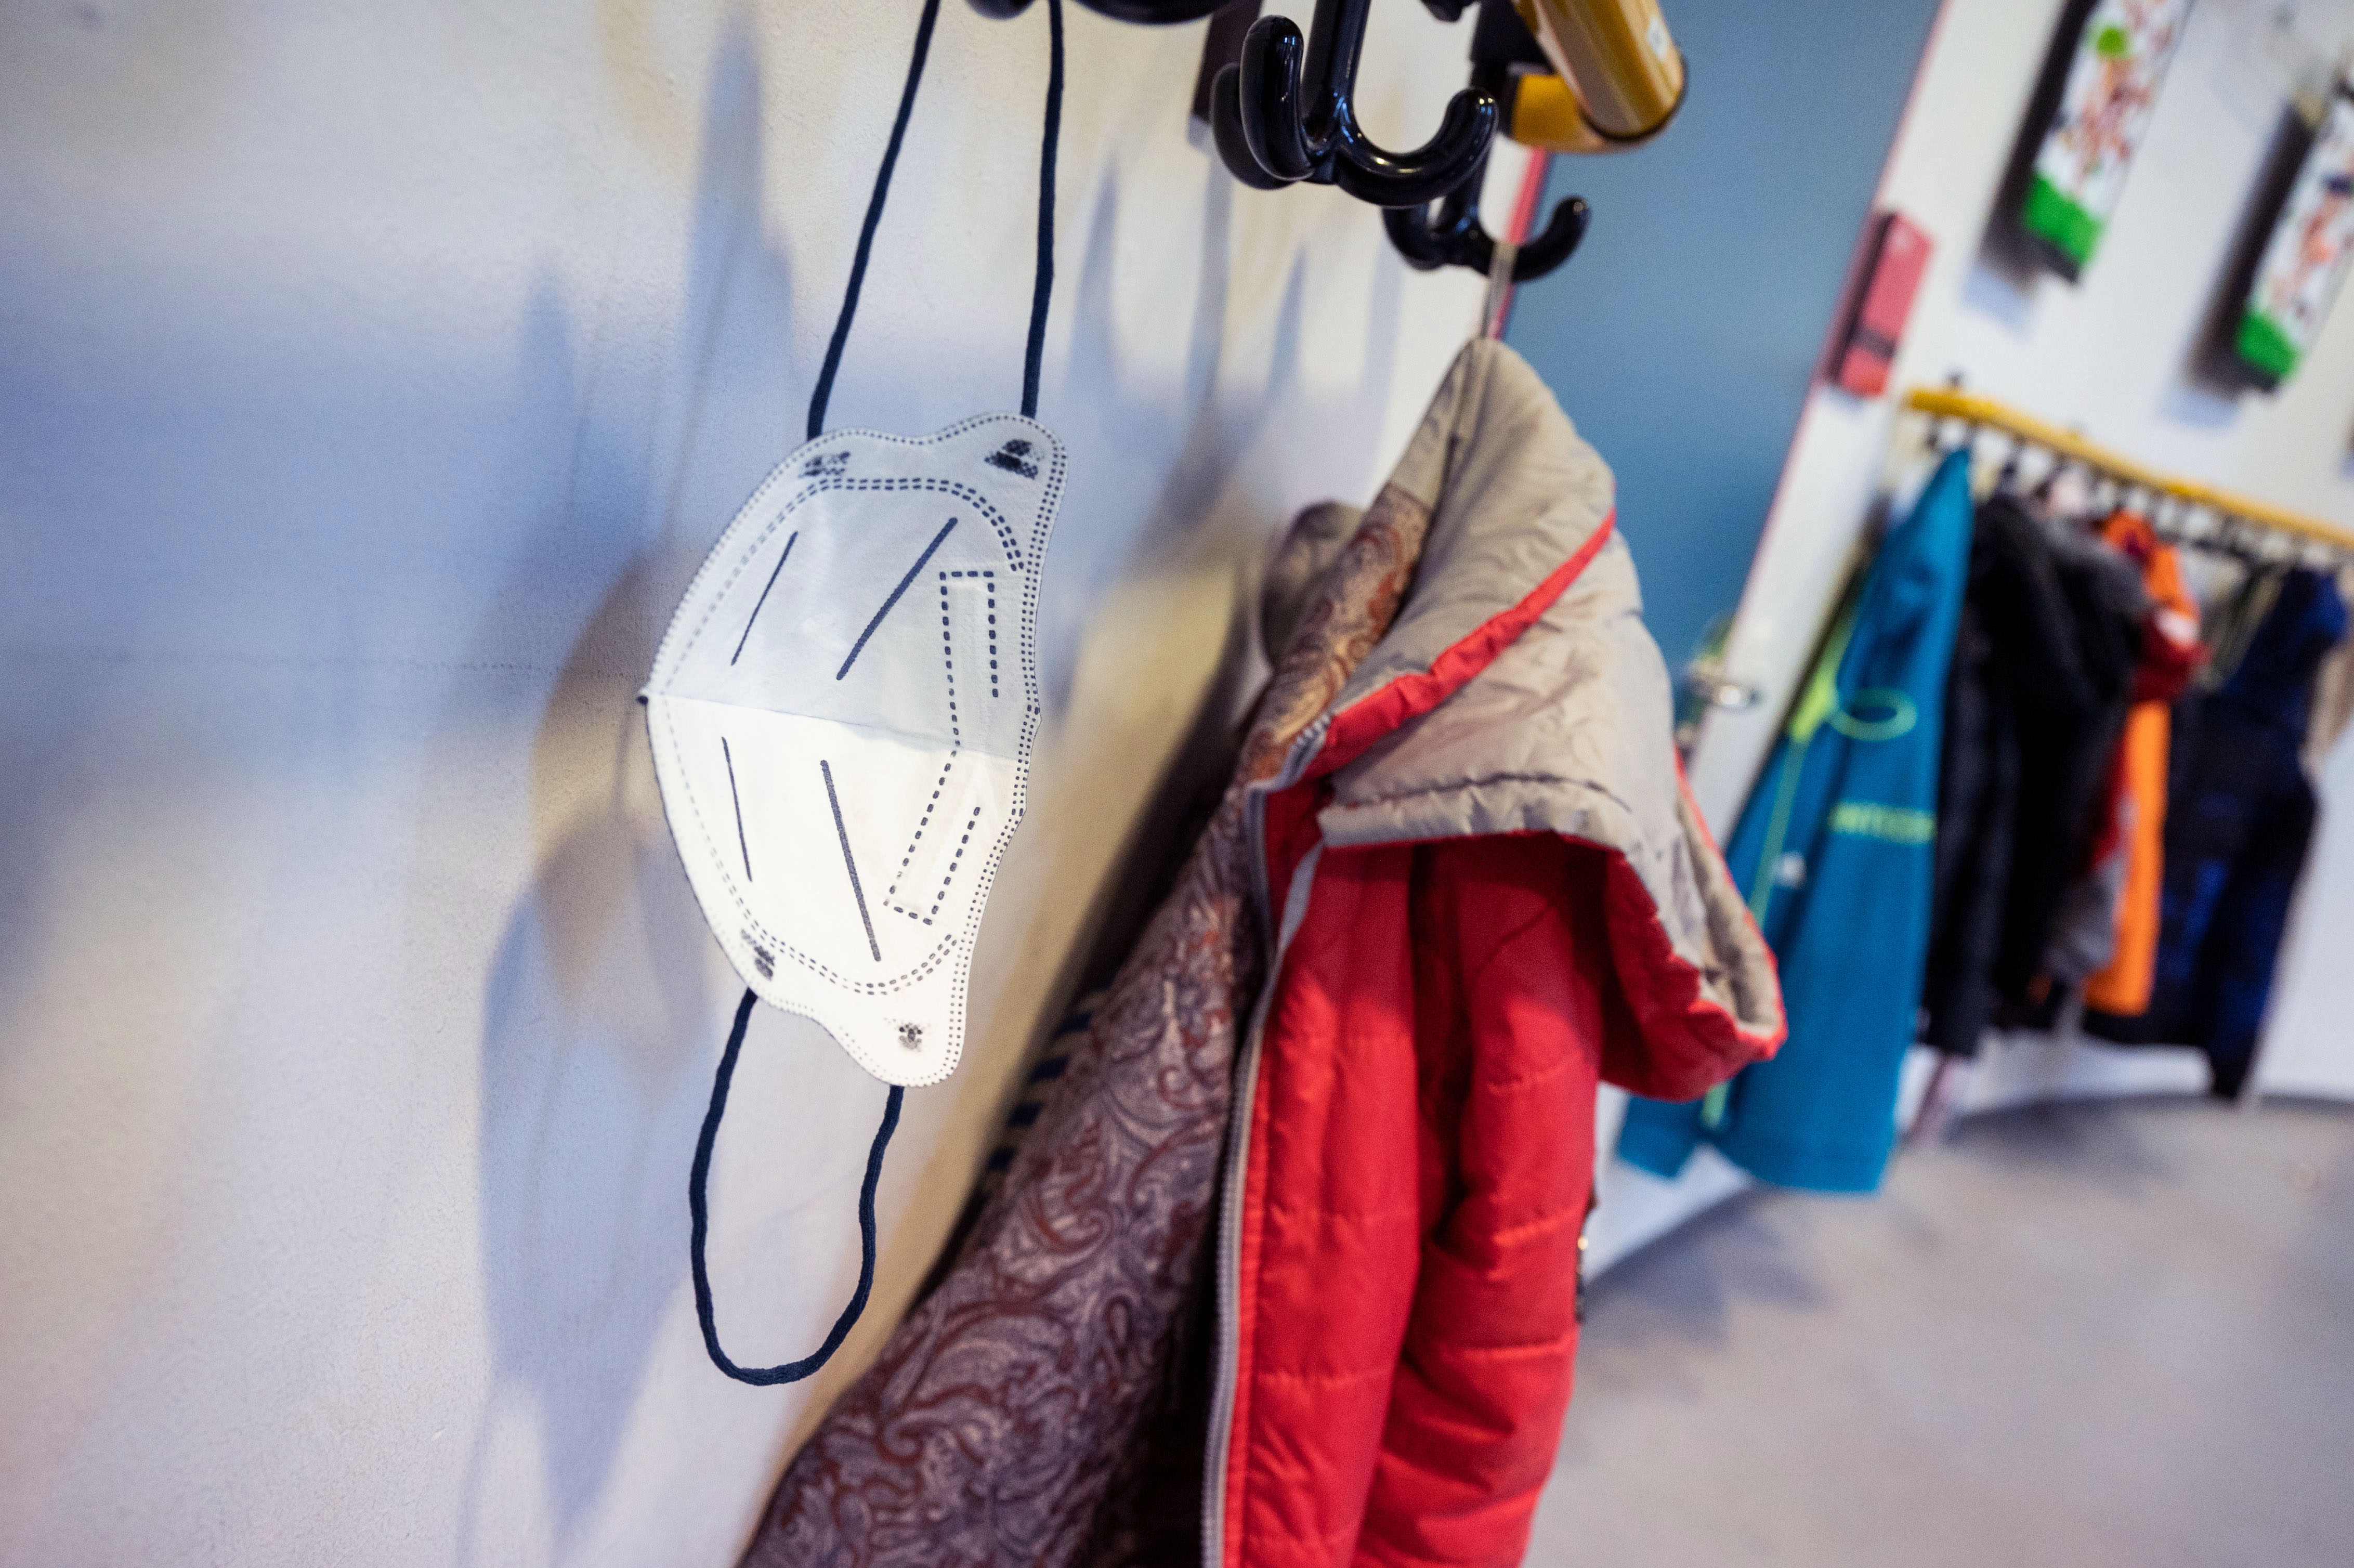 In a school hallway, a white mask hangs on a row of hooks next to a red child’s coat, with more coats in the background.